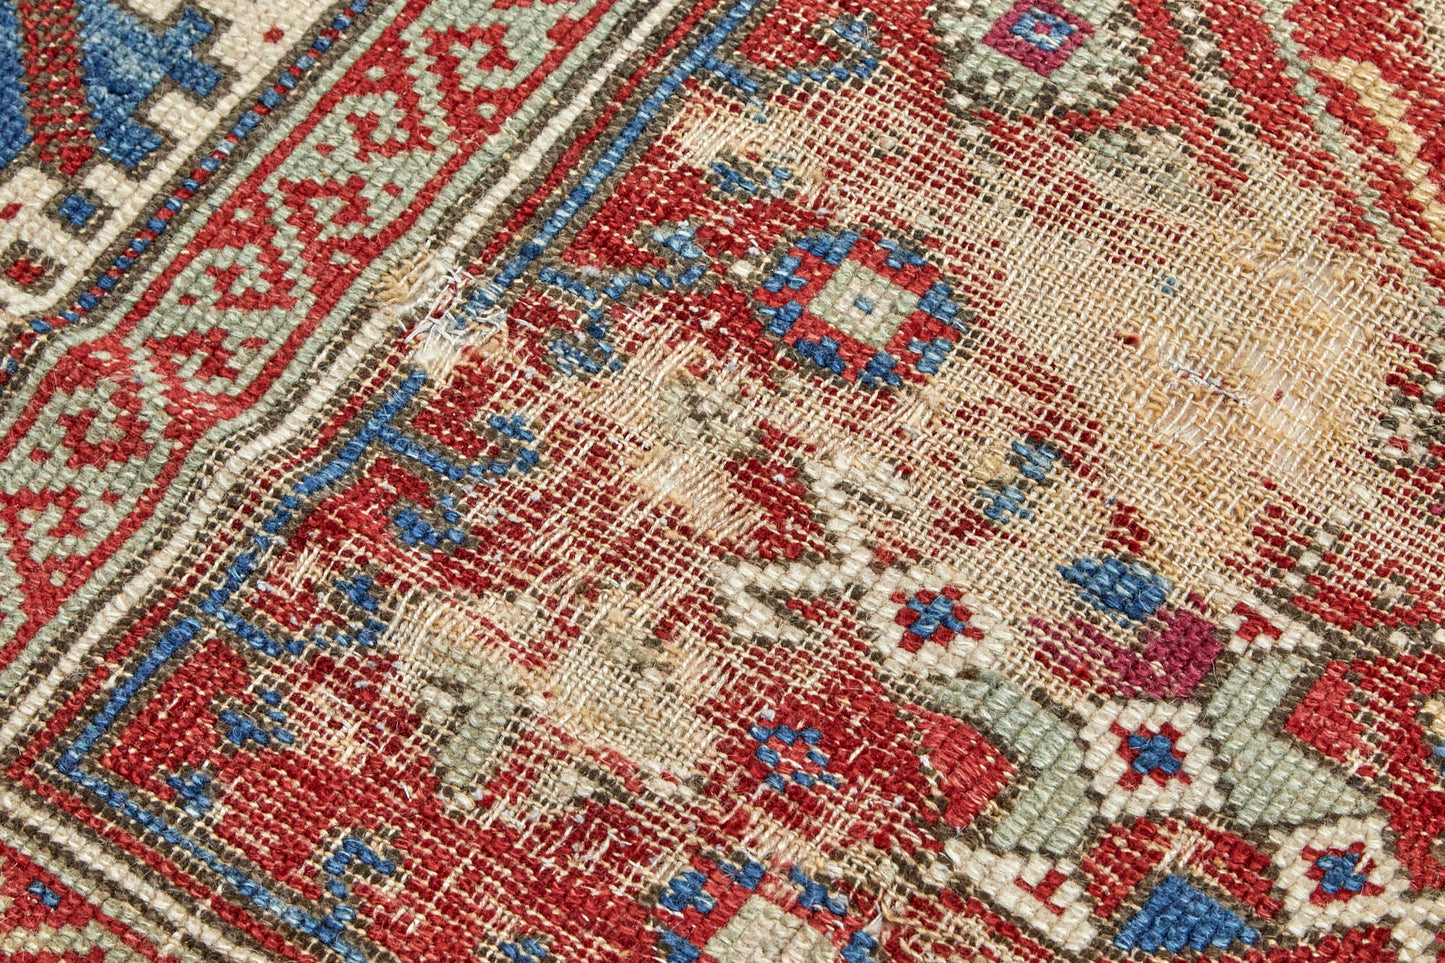 hand woven antique Persian Prayer rug with red, green, blue, white and yellow weaving - Available from King Kennedy Rugs Los Angeles